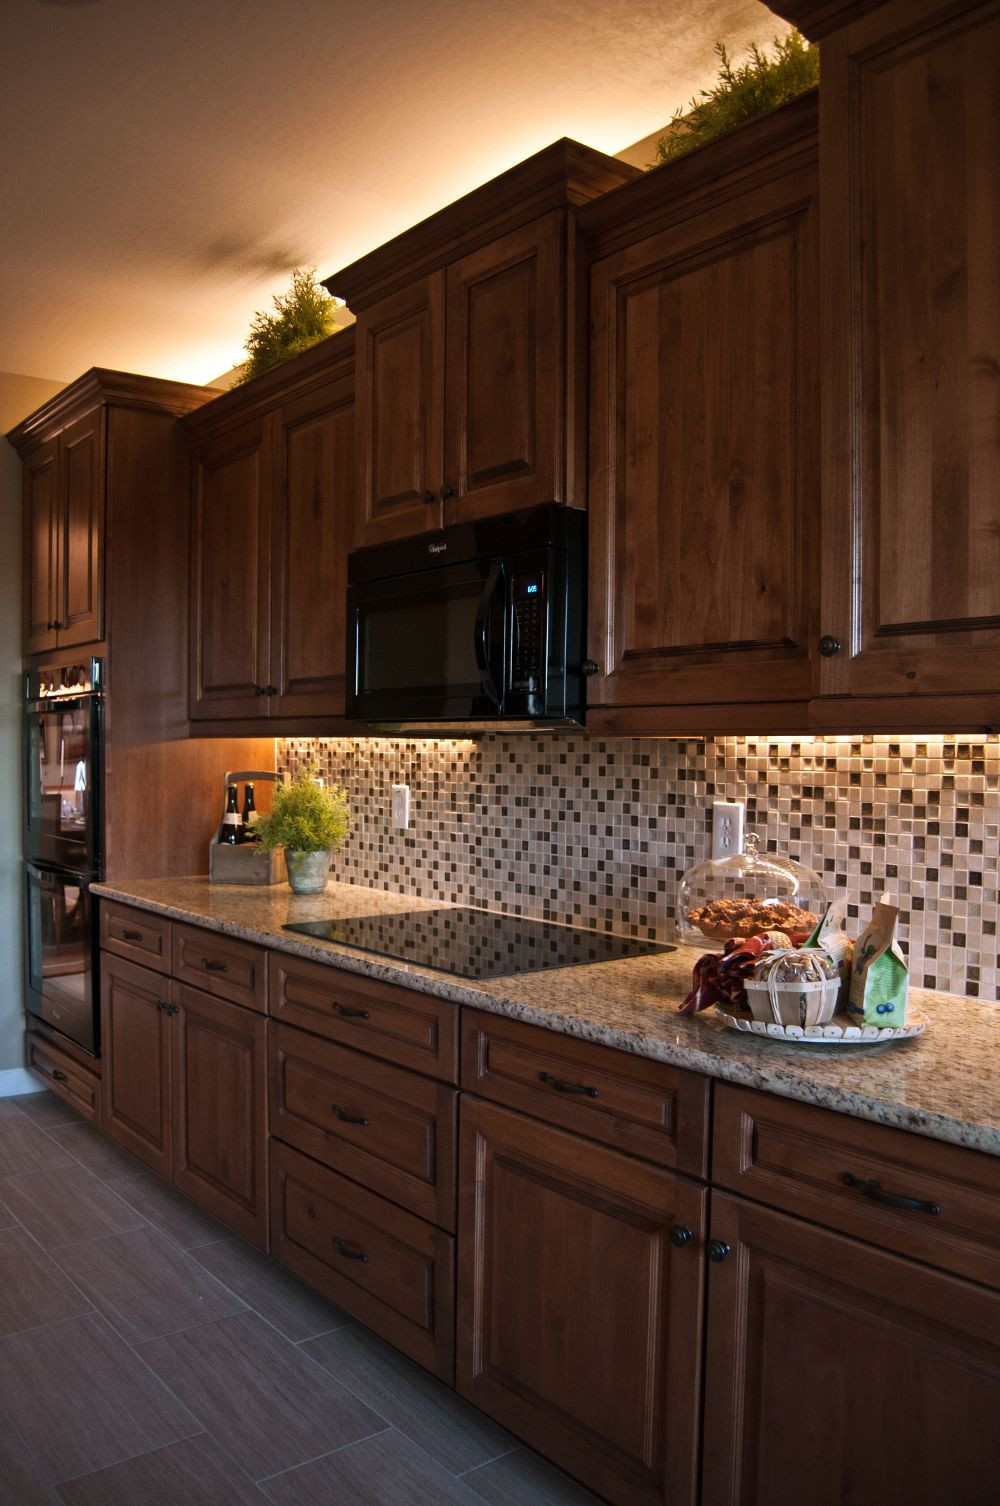 Kitchen Lighting Cabinet
 Kitchen LED lights I like the downlights but not the